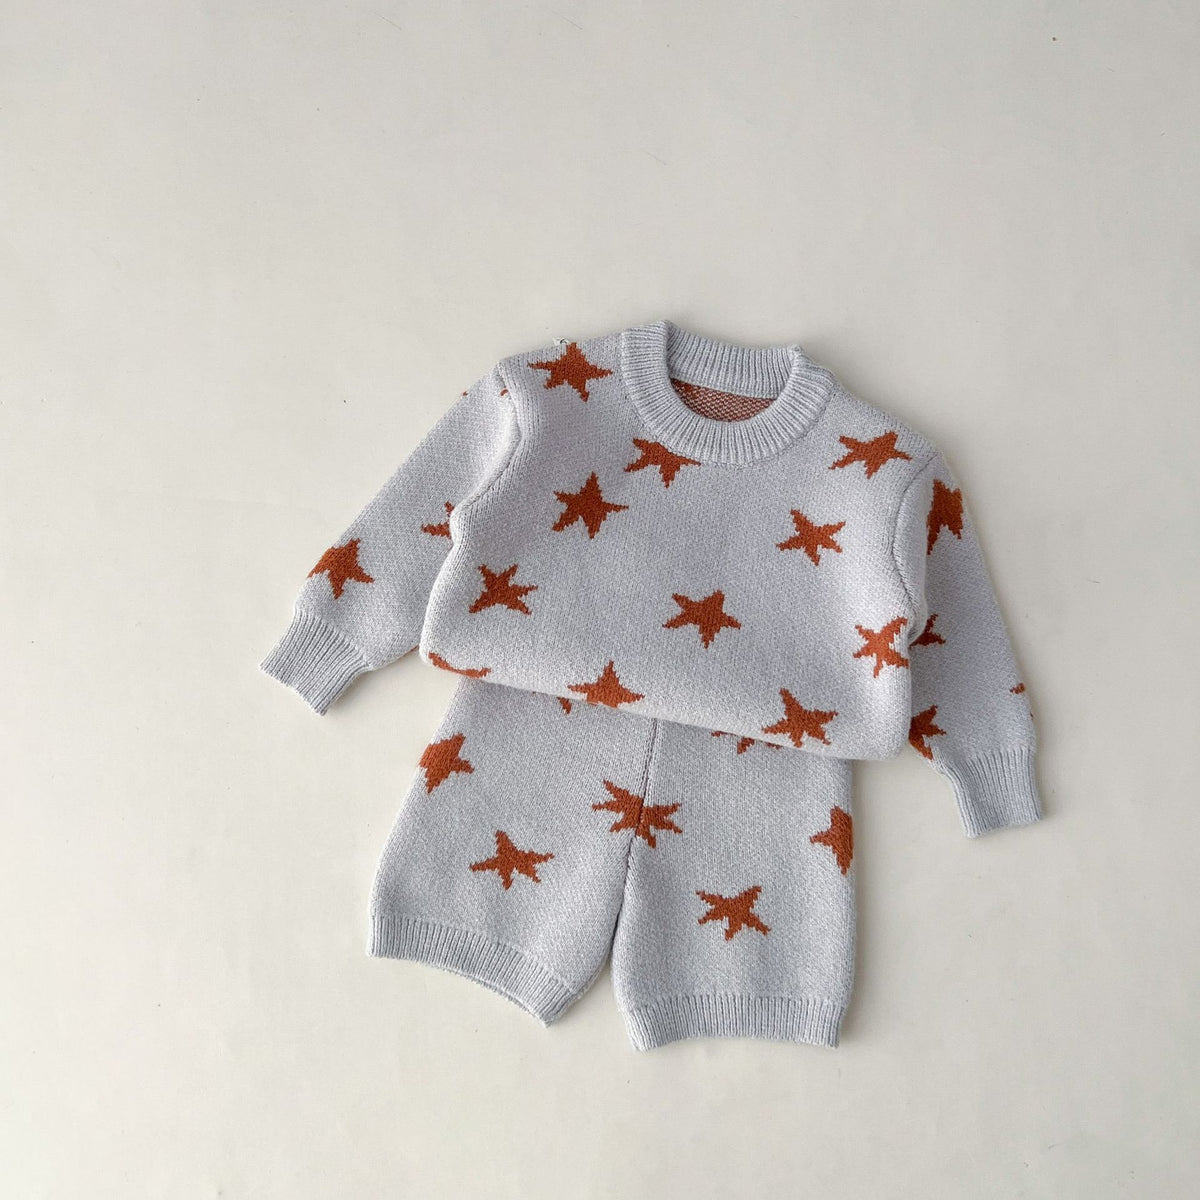 2 Pieces Set Baby Kid Girls Star Tops And Pants Wholesale 24030116